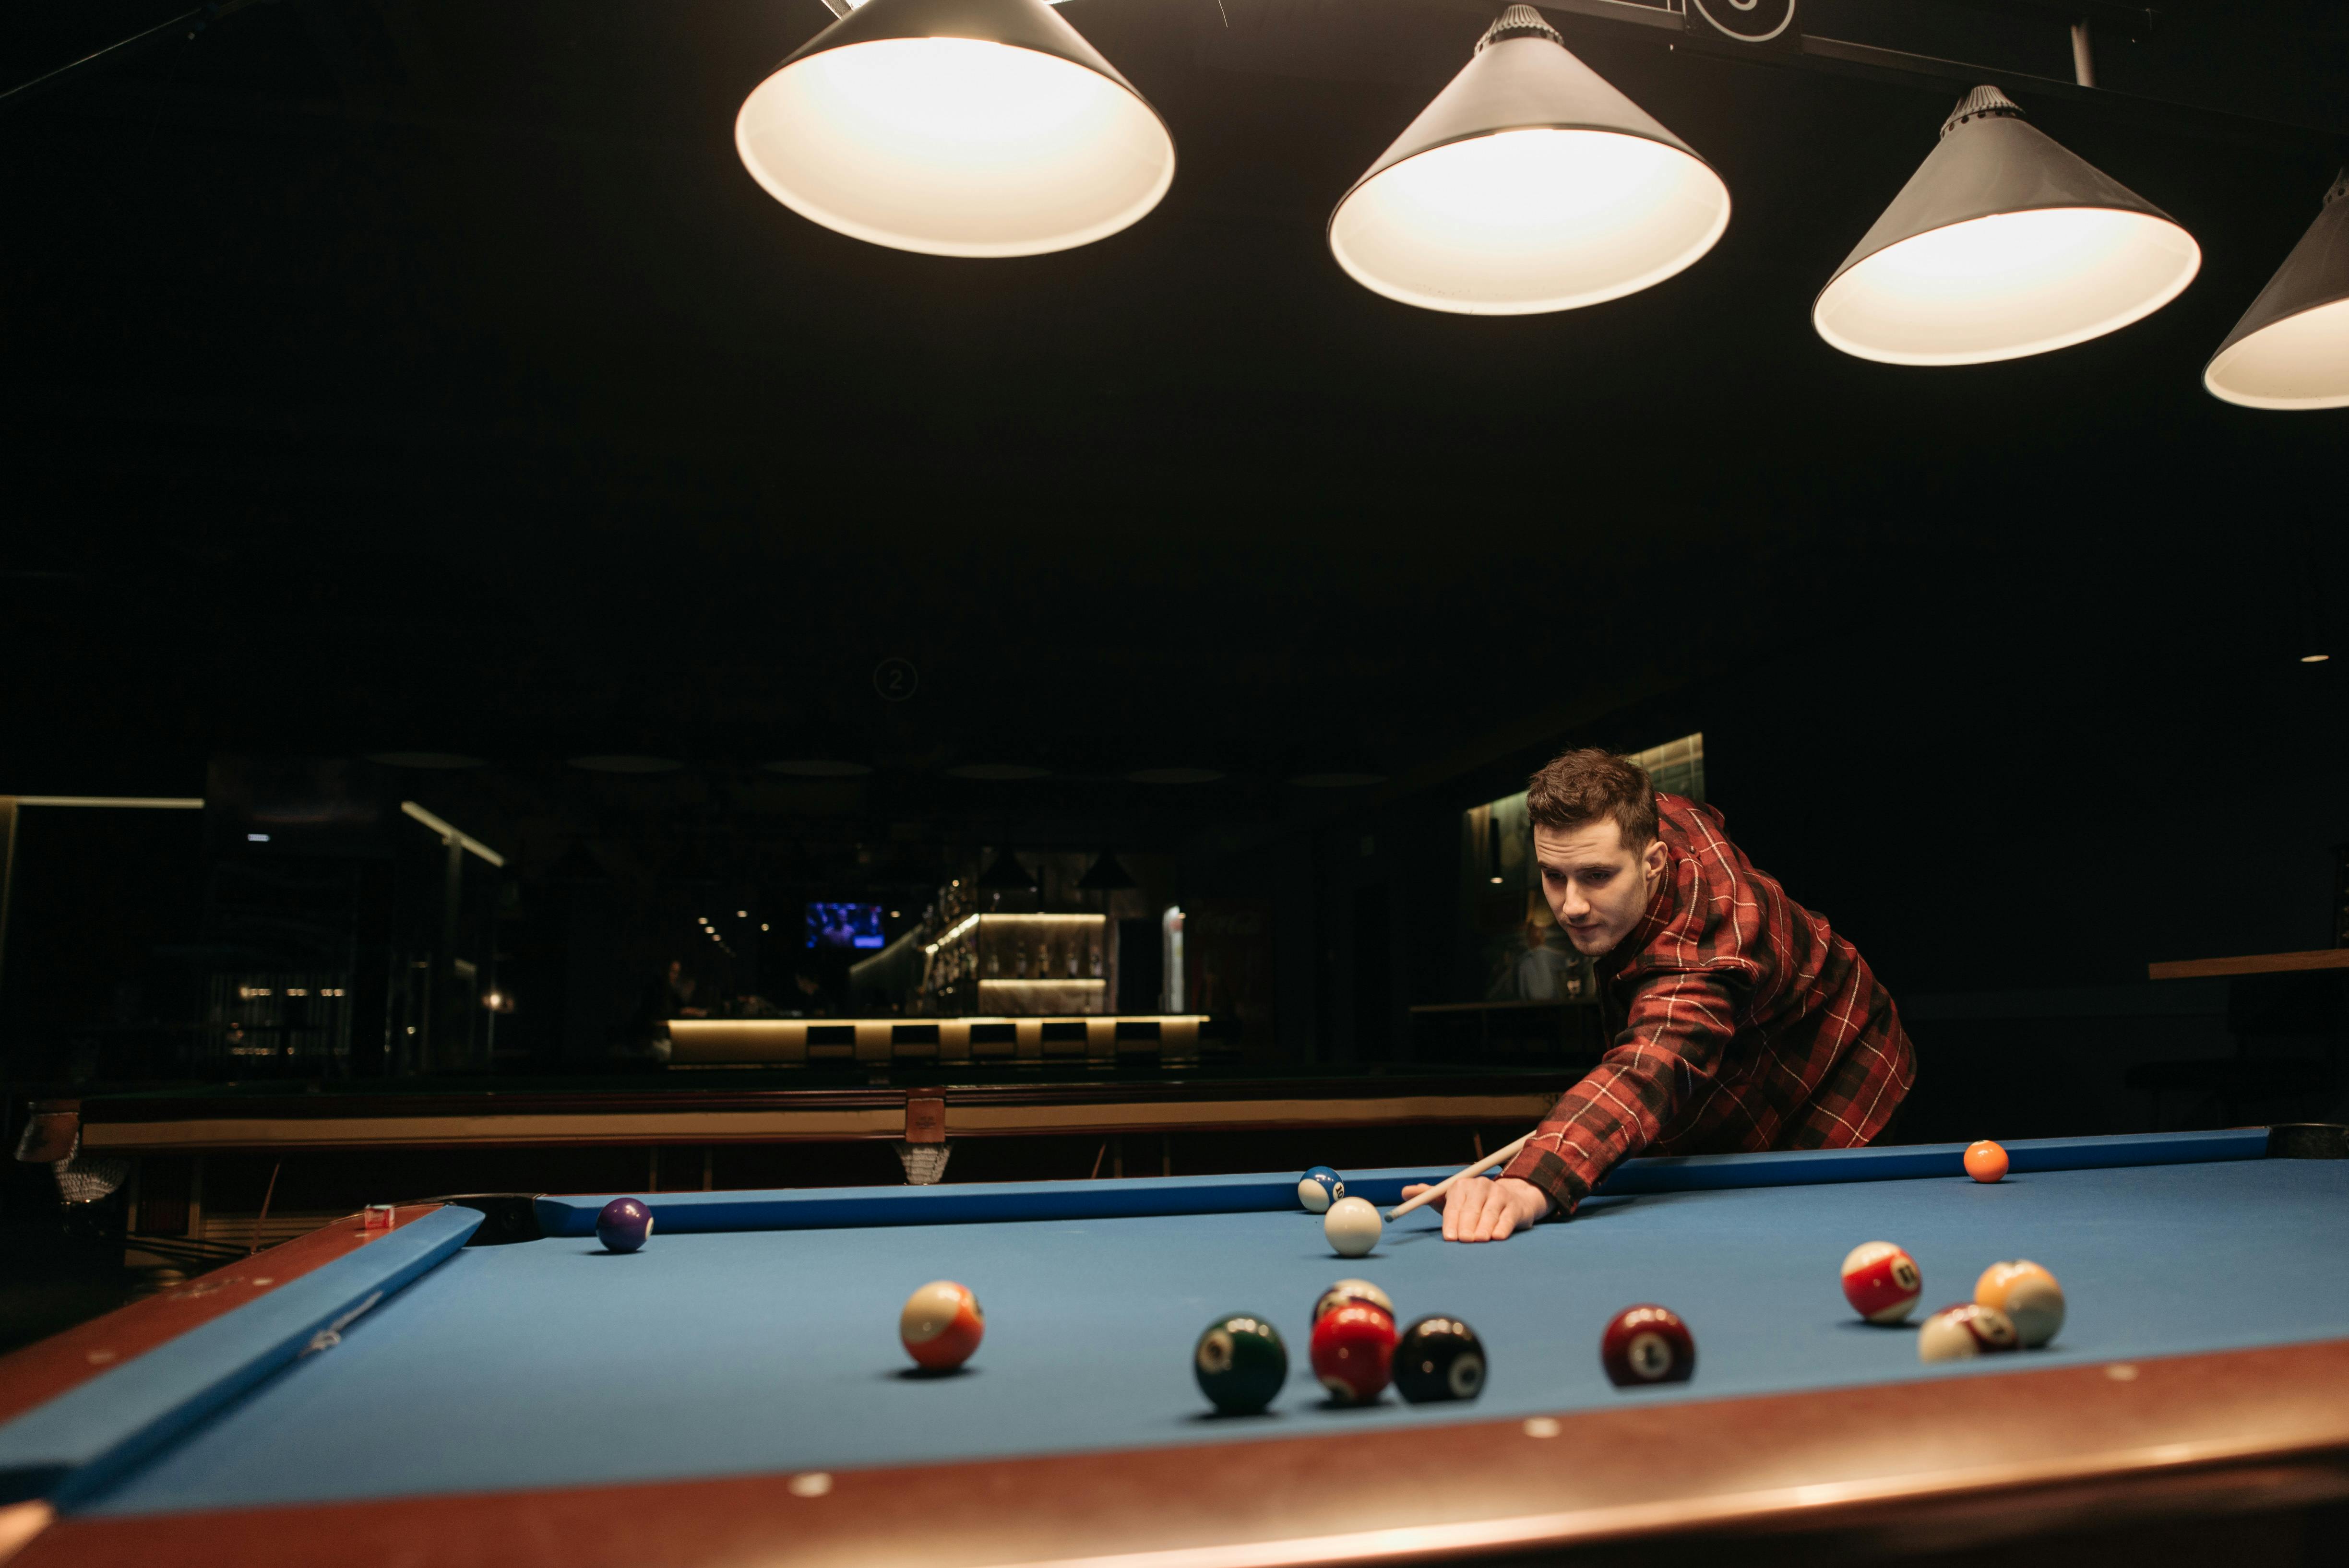 man in red and black plaid shirt playing billiard